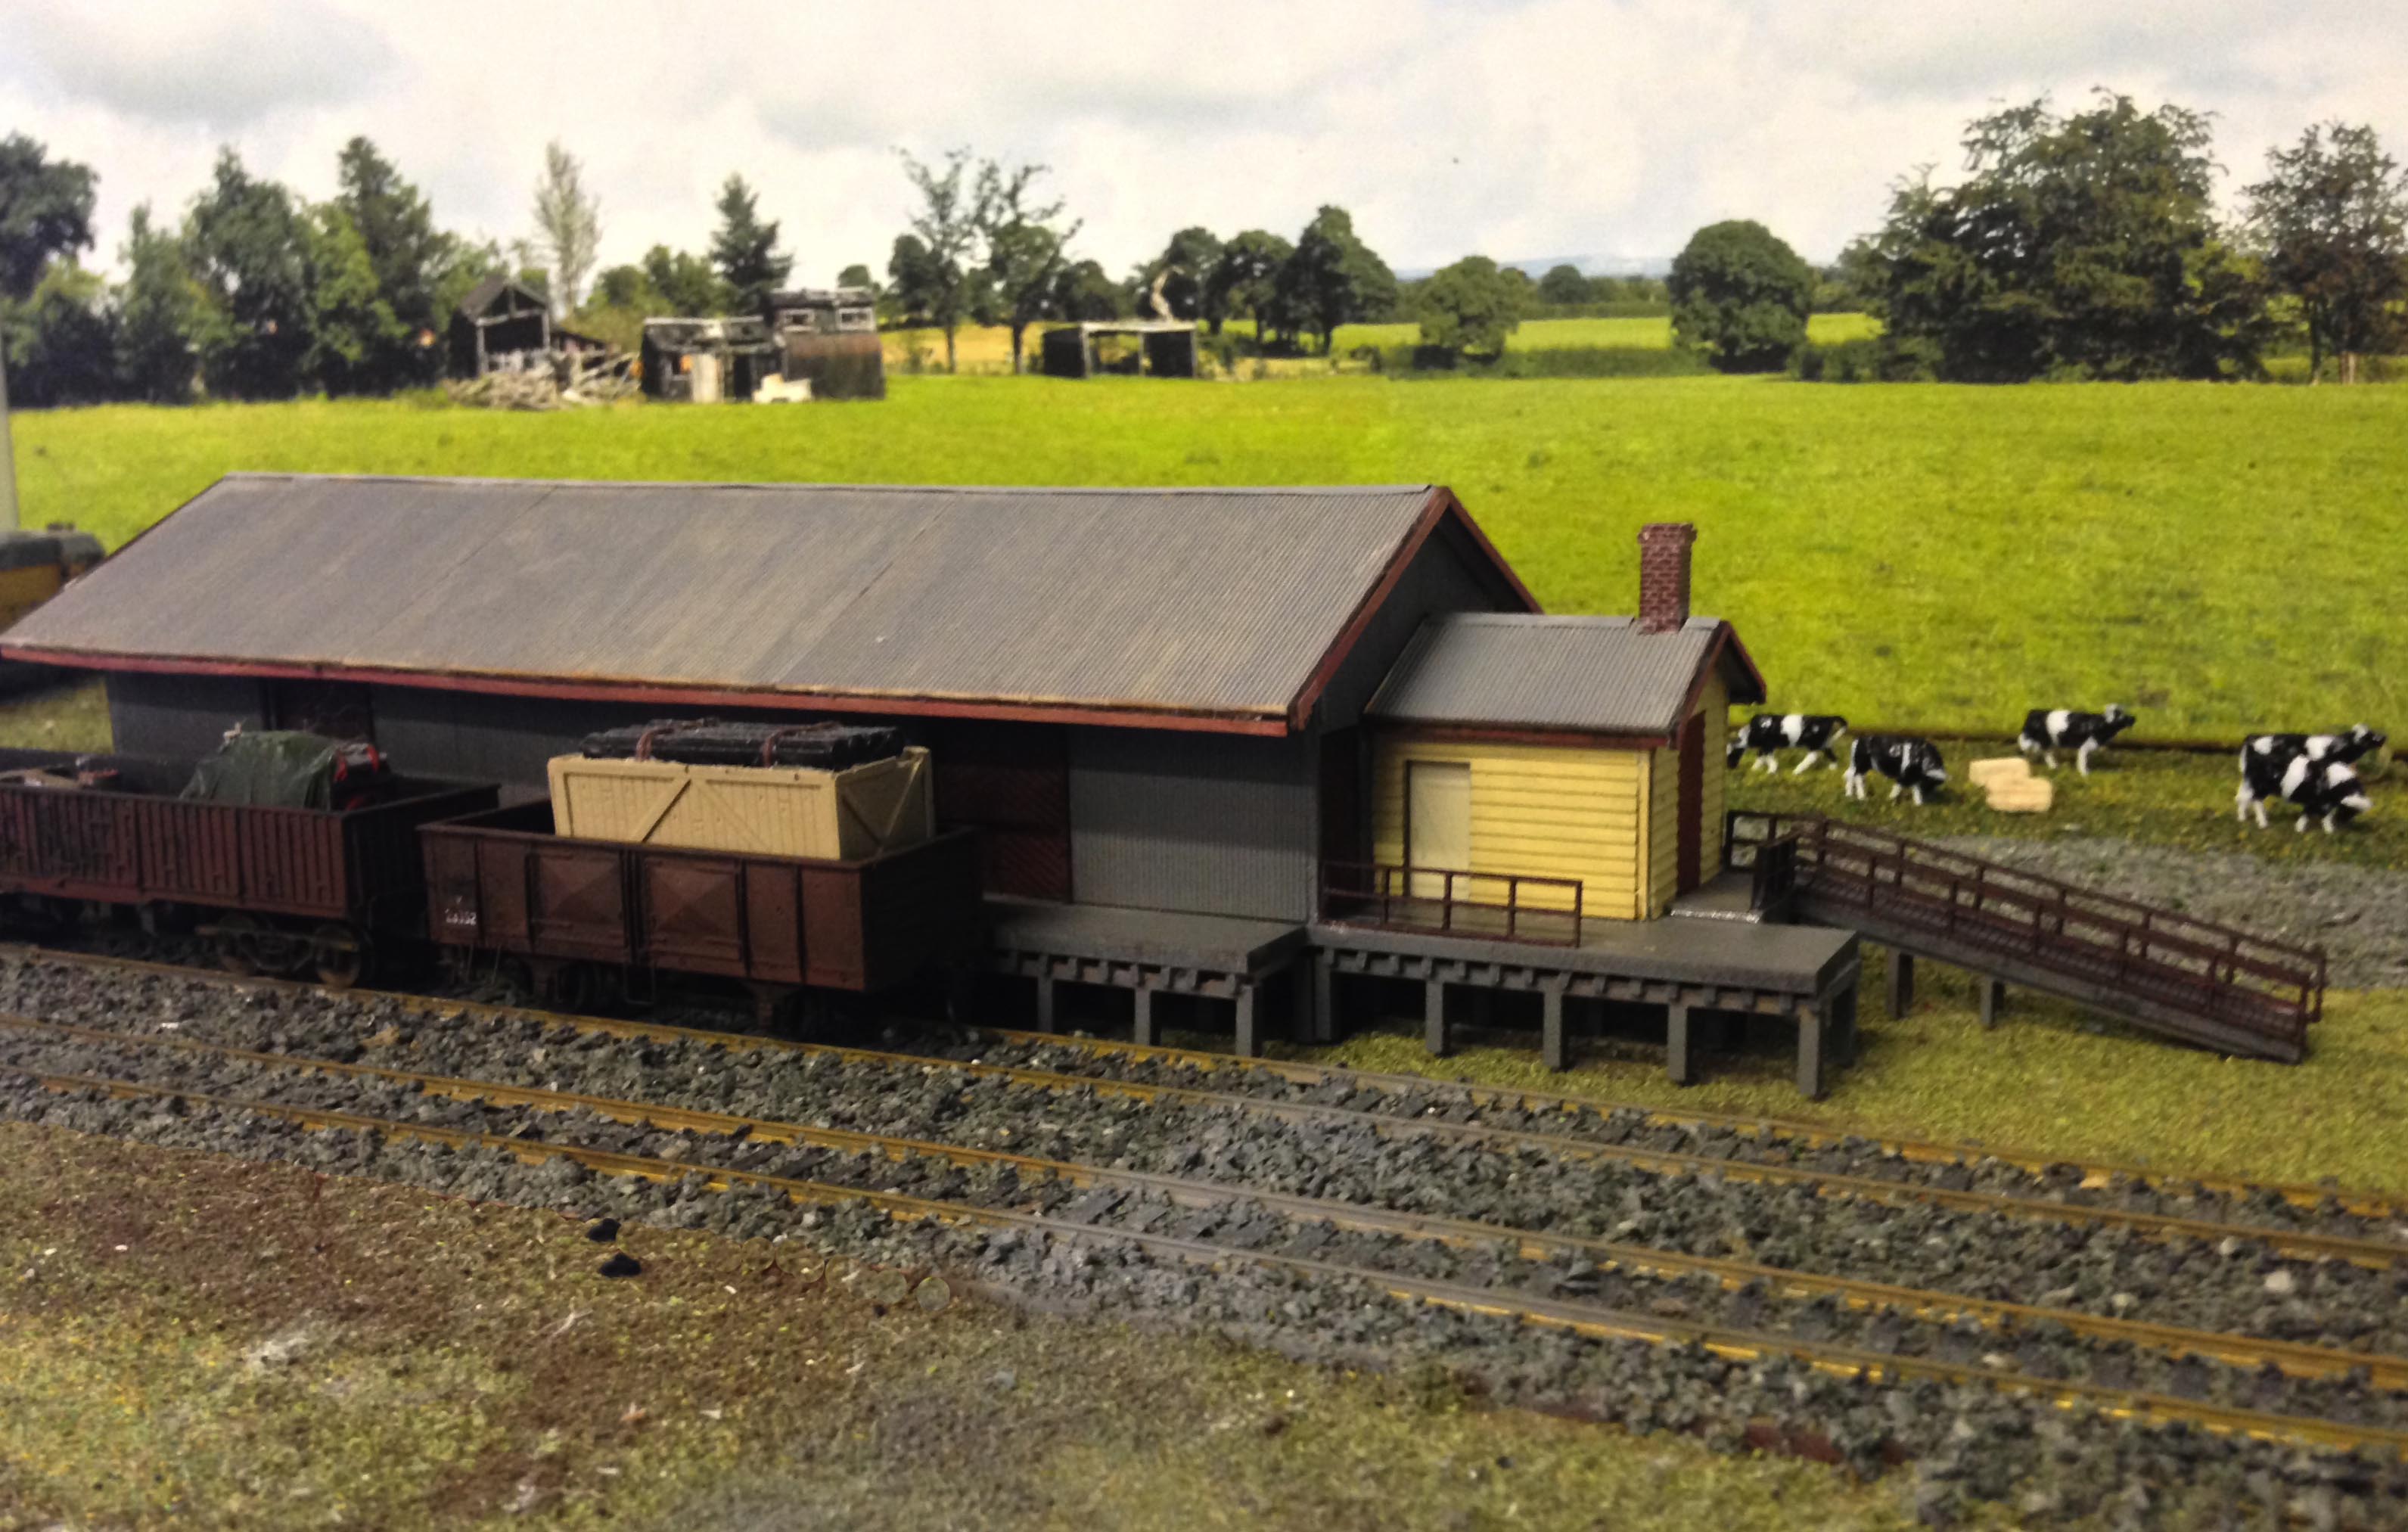 HO scale building NSWGR G2 Goods shed KIT 1:87 scale 